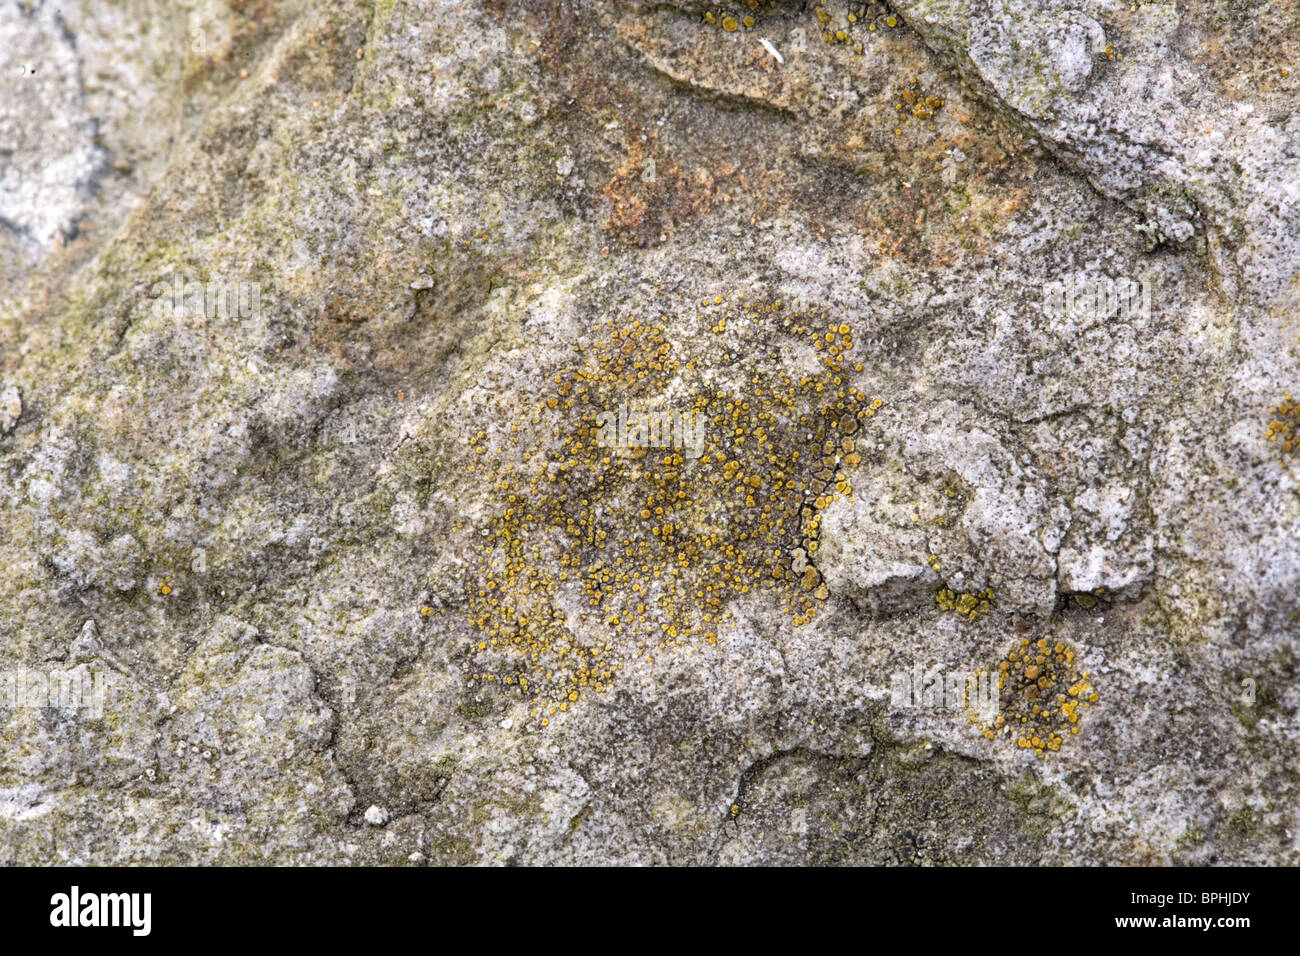 Close up of the lichen Caloplaca holocarpa (yellow) on granite, Streefkerk, Holland Stock Photo